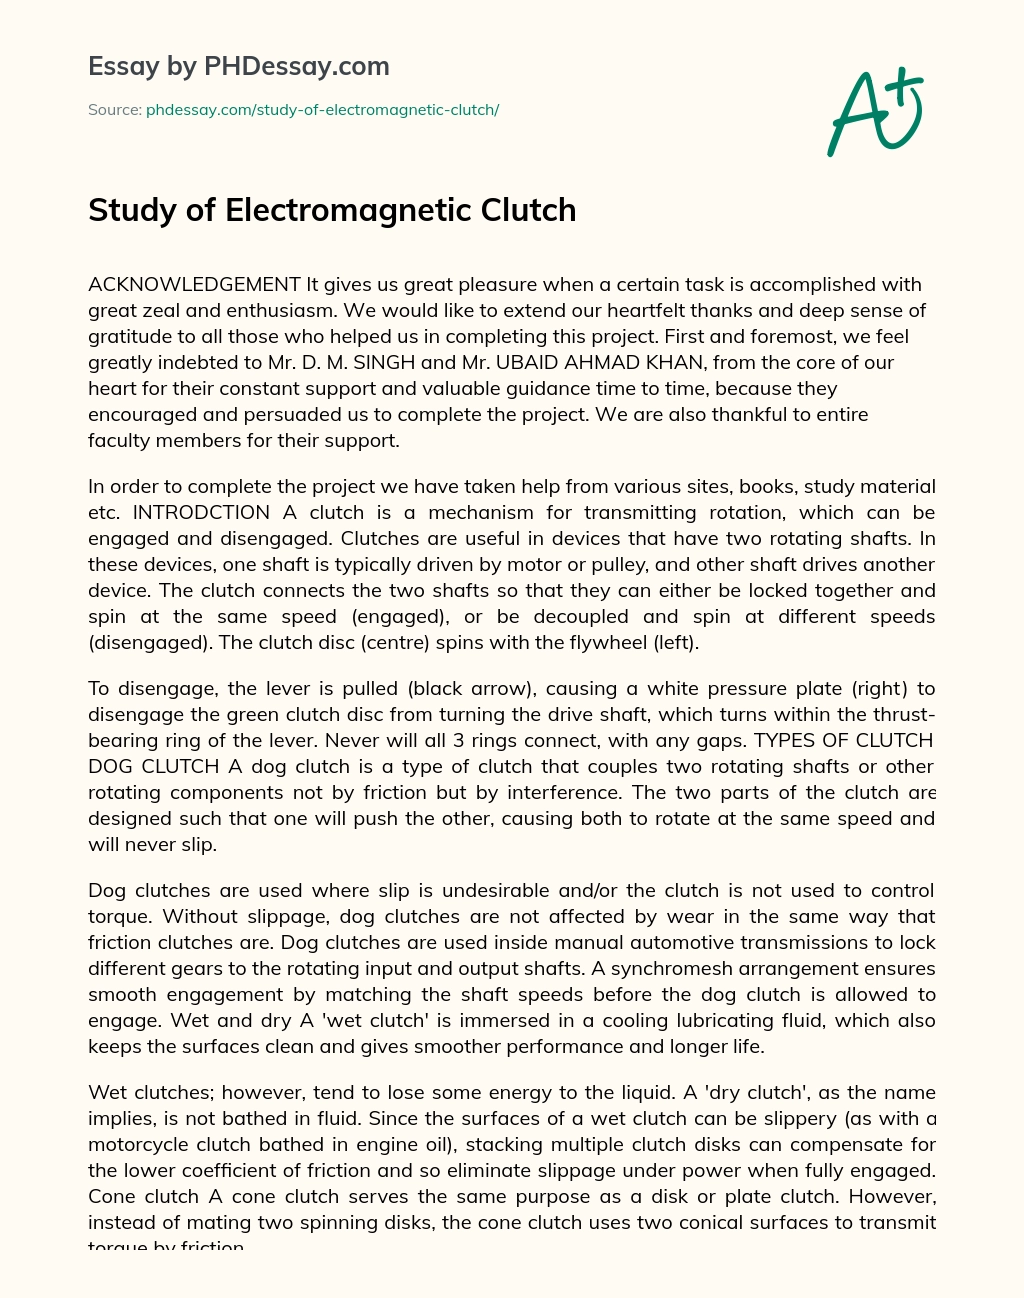 Study of Electromagnetic Clutch essay